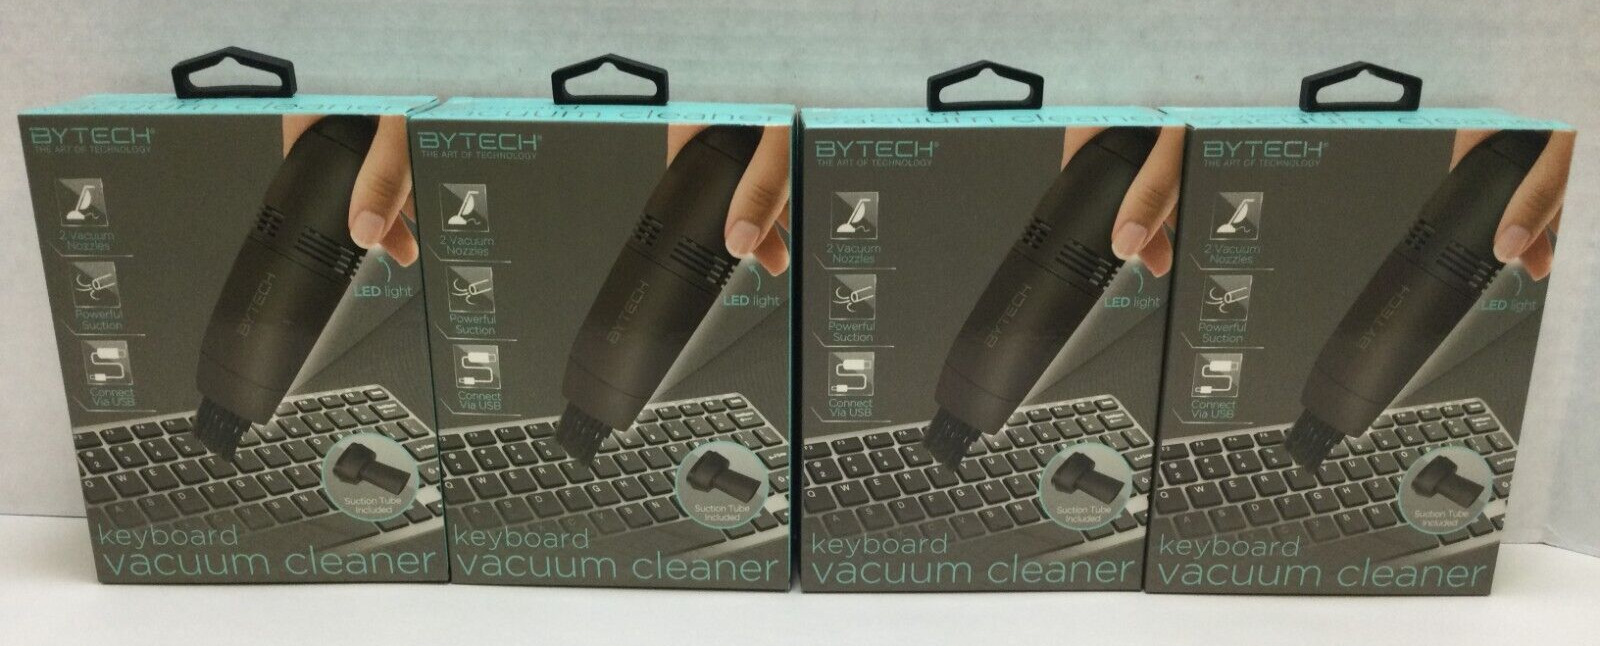 BYTECH Keyboard Vacuume Cleaner, 2 Nozzles, Powerful Suction, LED Light, 4 Pack